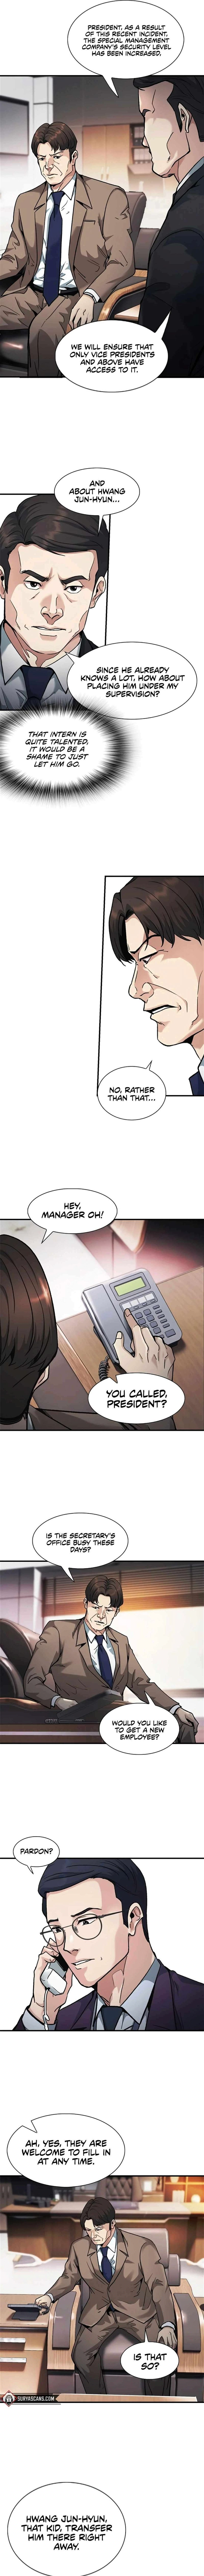 Chairman Kang: The Newcomer Chapter 11 page 7